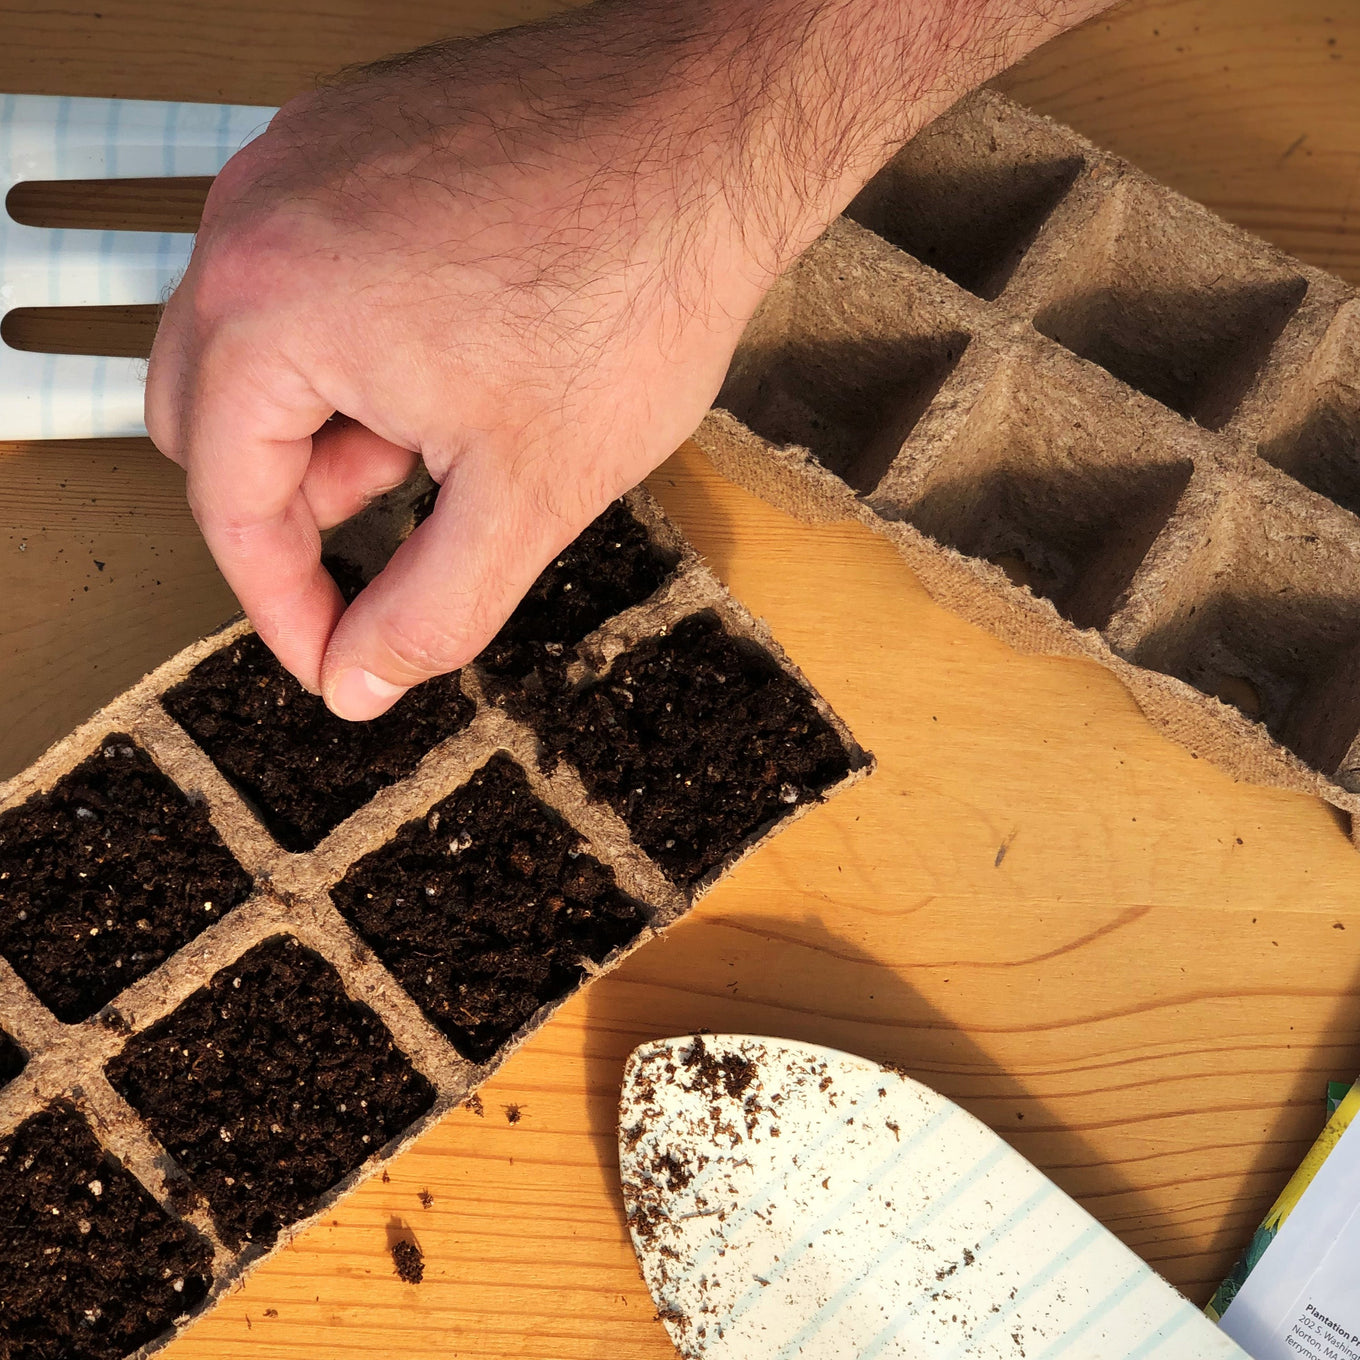 Start your Emerald Okra seeds in Jiffy peat strip trays filled with sowing mix.